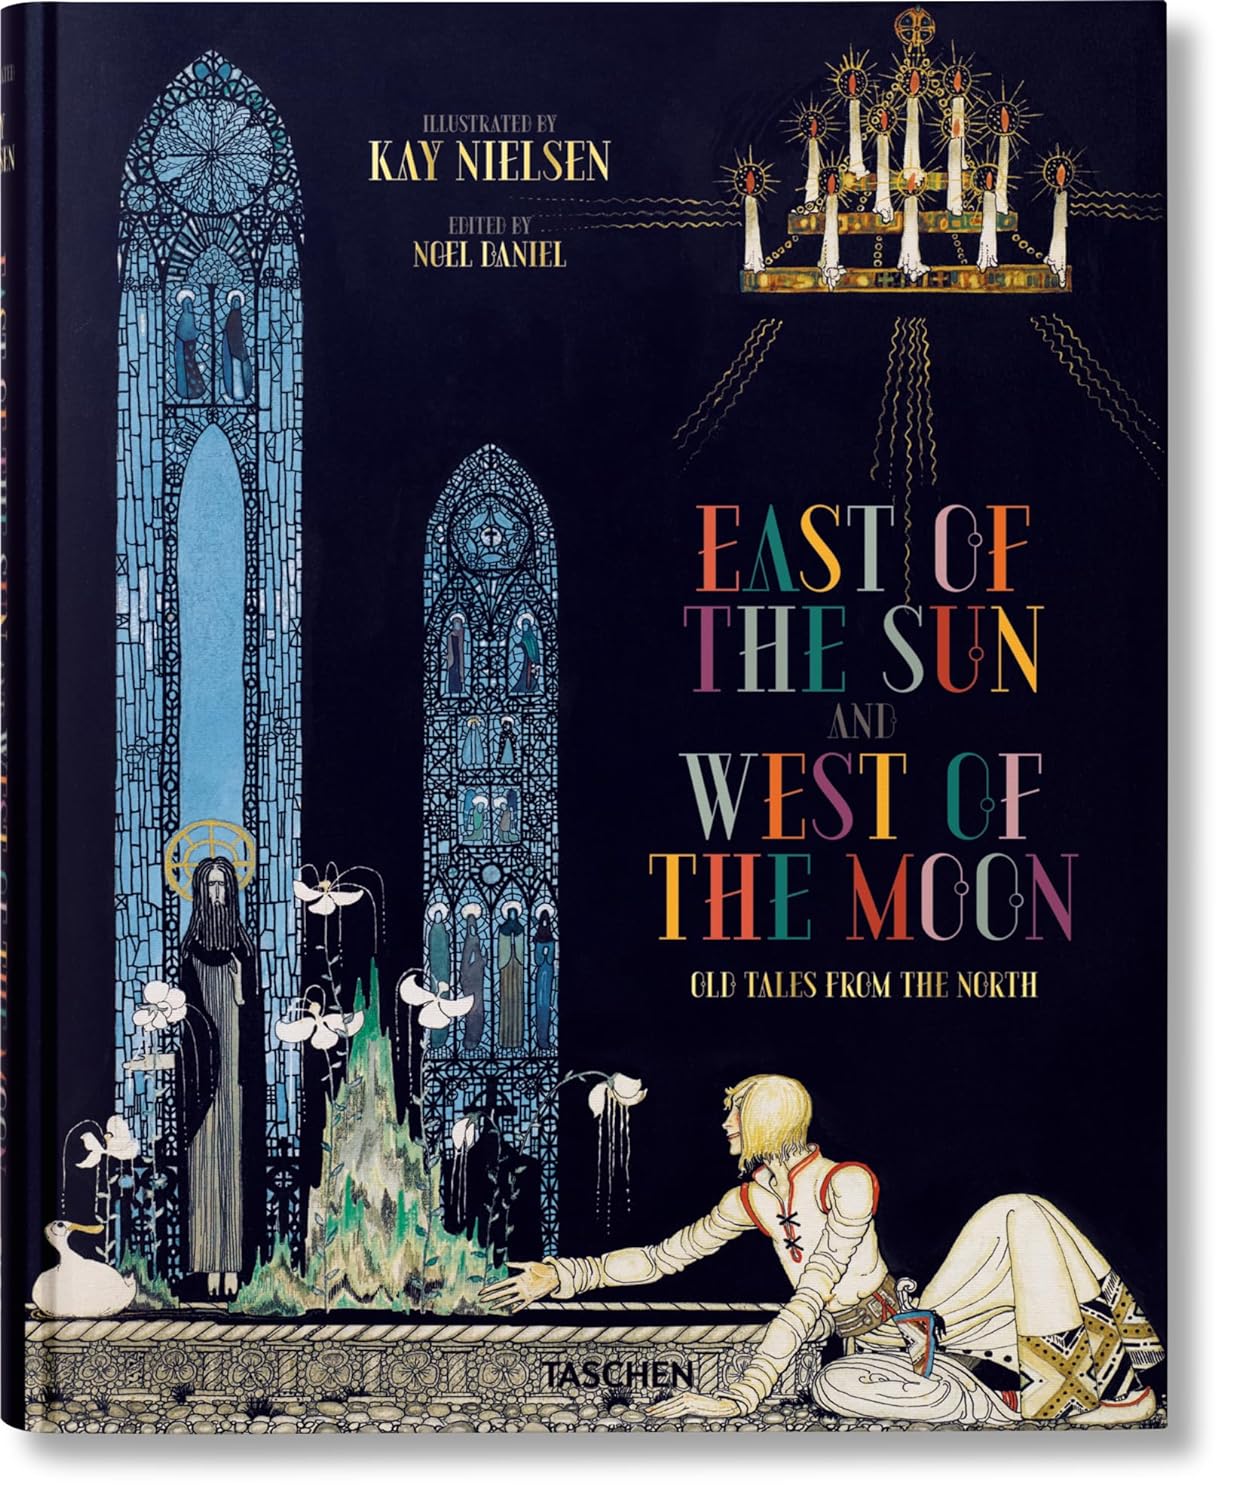 Discover the Magical World of Kay Nielsen - East of the Sun and West of the Moon